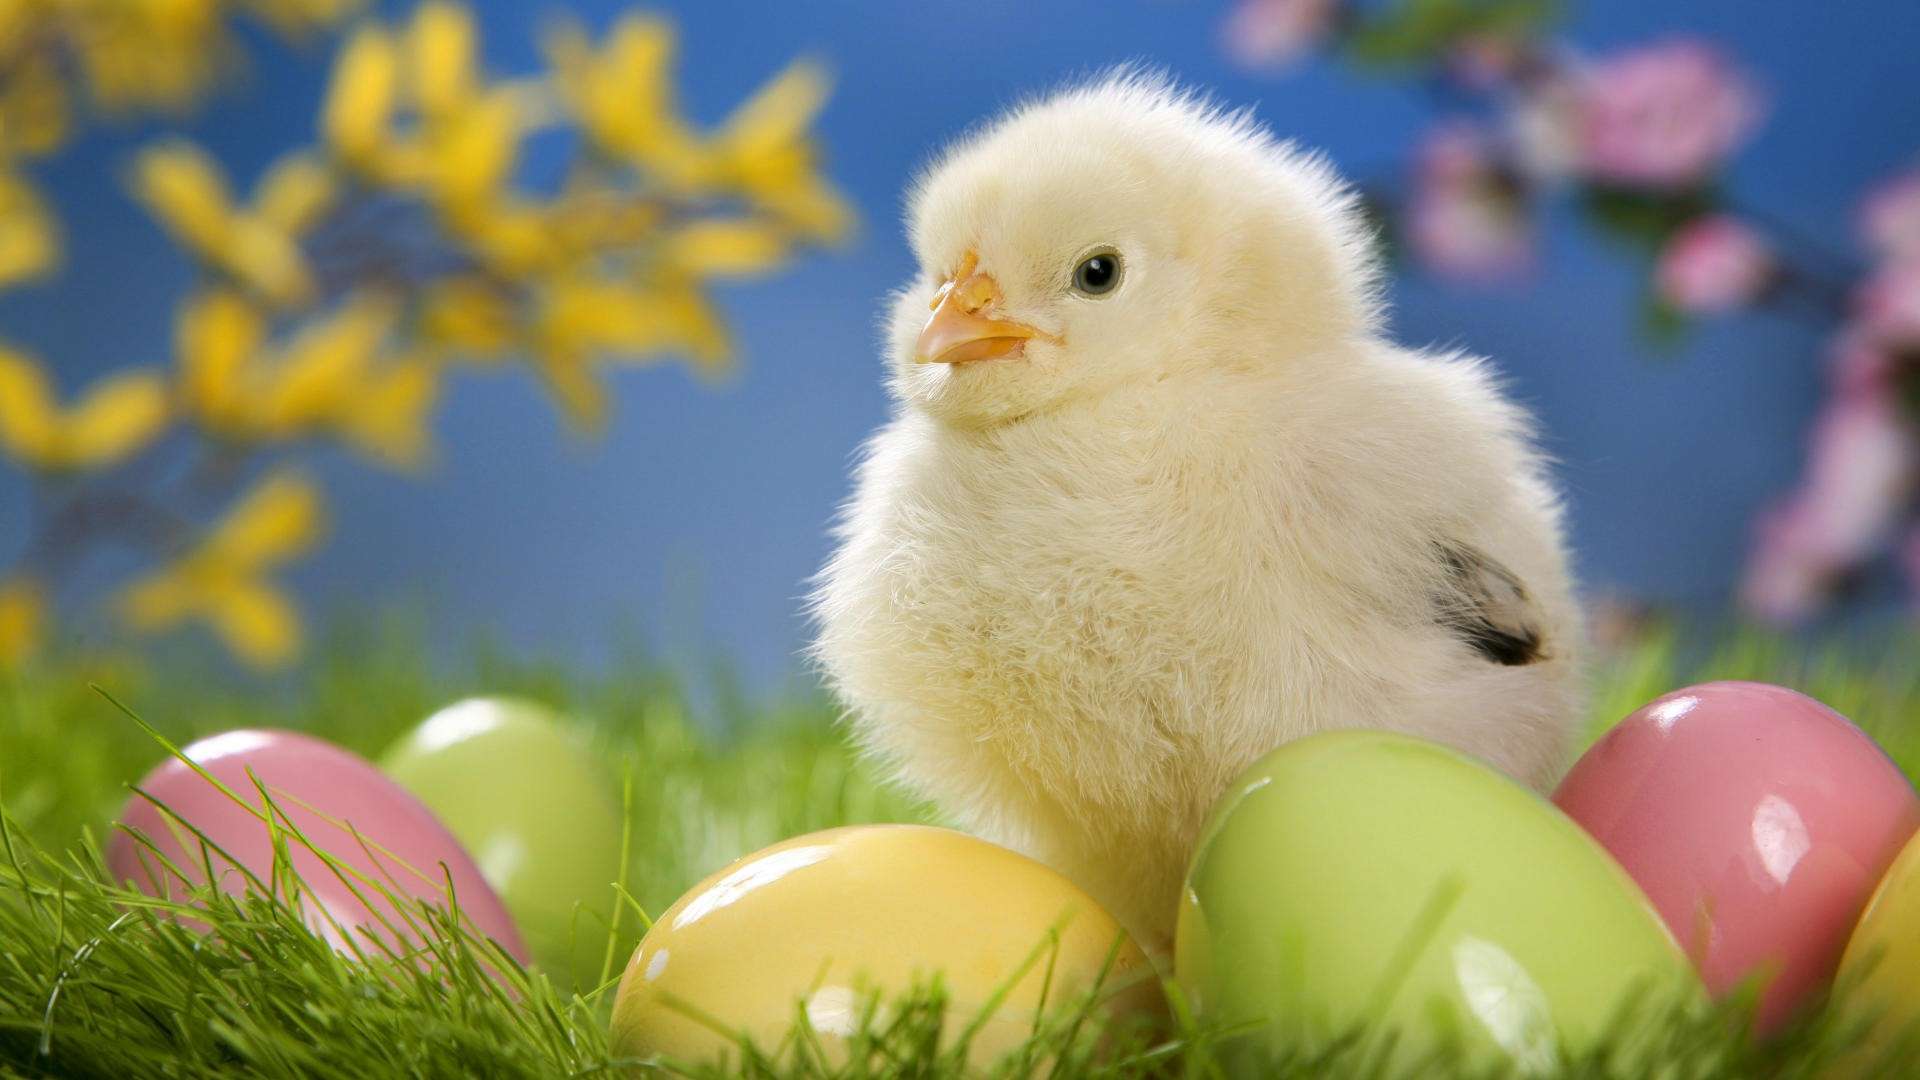 Cute Easter Chick with Eggs HD Wallpaper 187 FullHDWpp